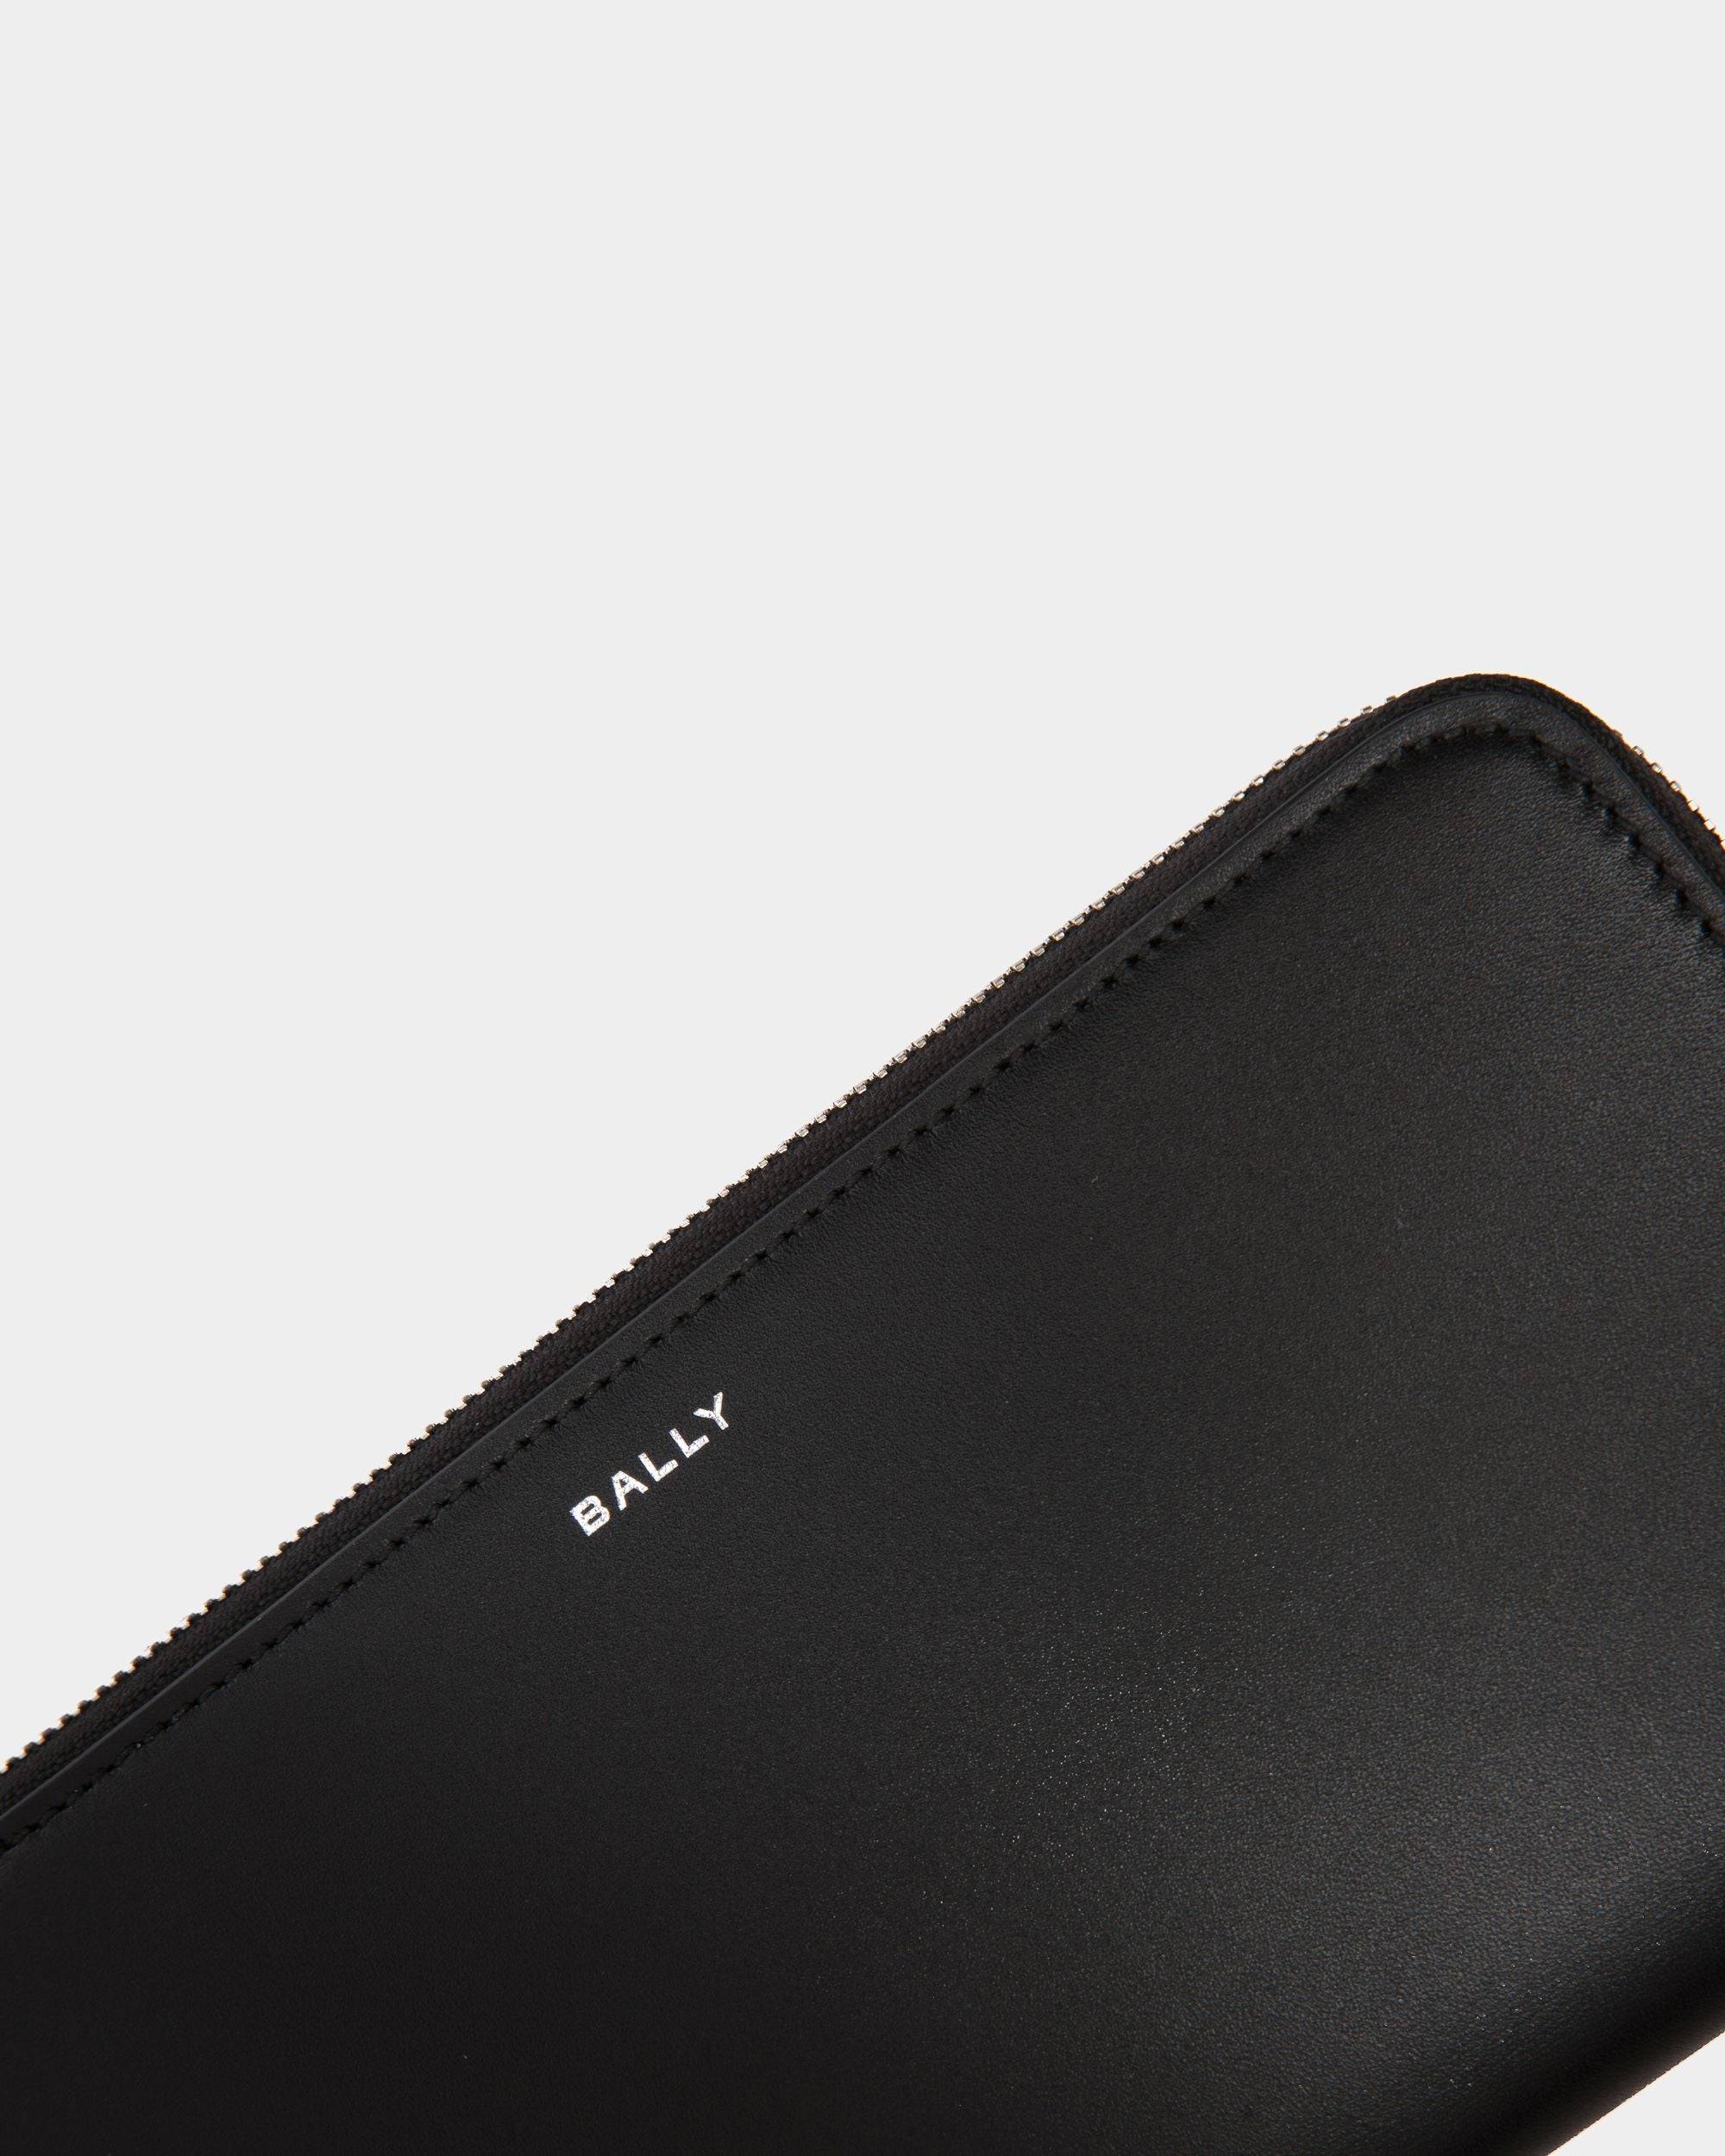 Busy Bally | Men's Zip Around Wallet in Black Leather | Bally | Still Life Detail